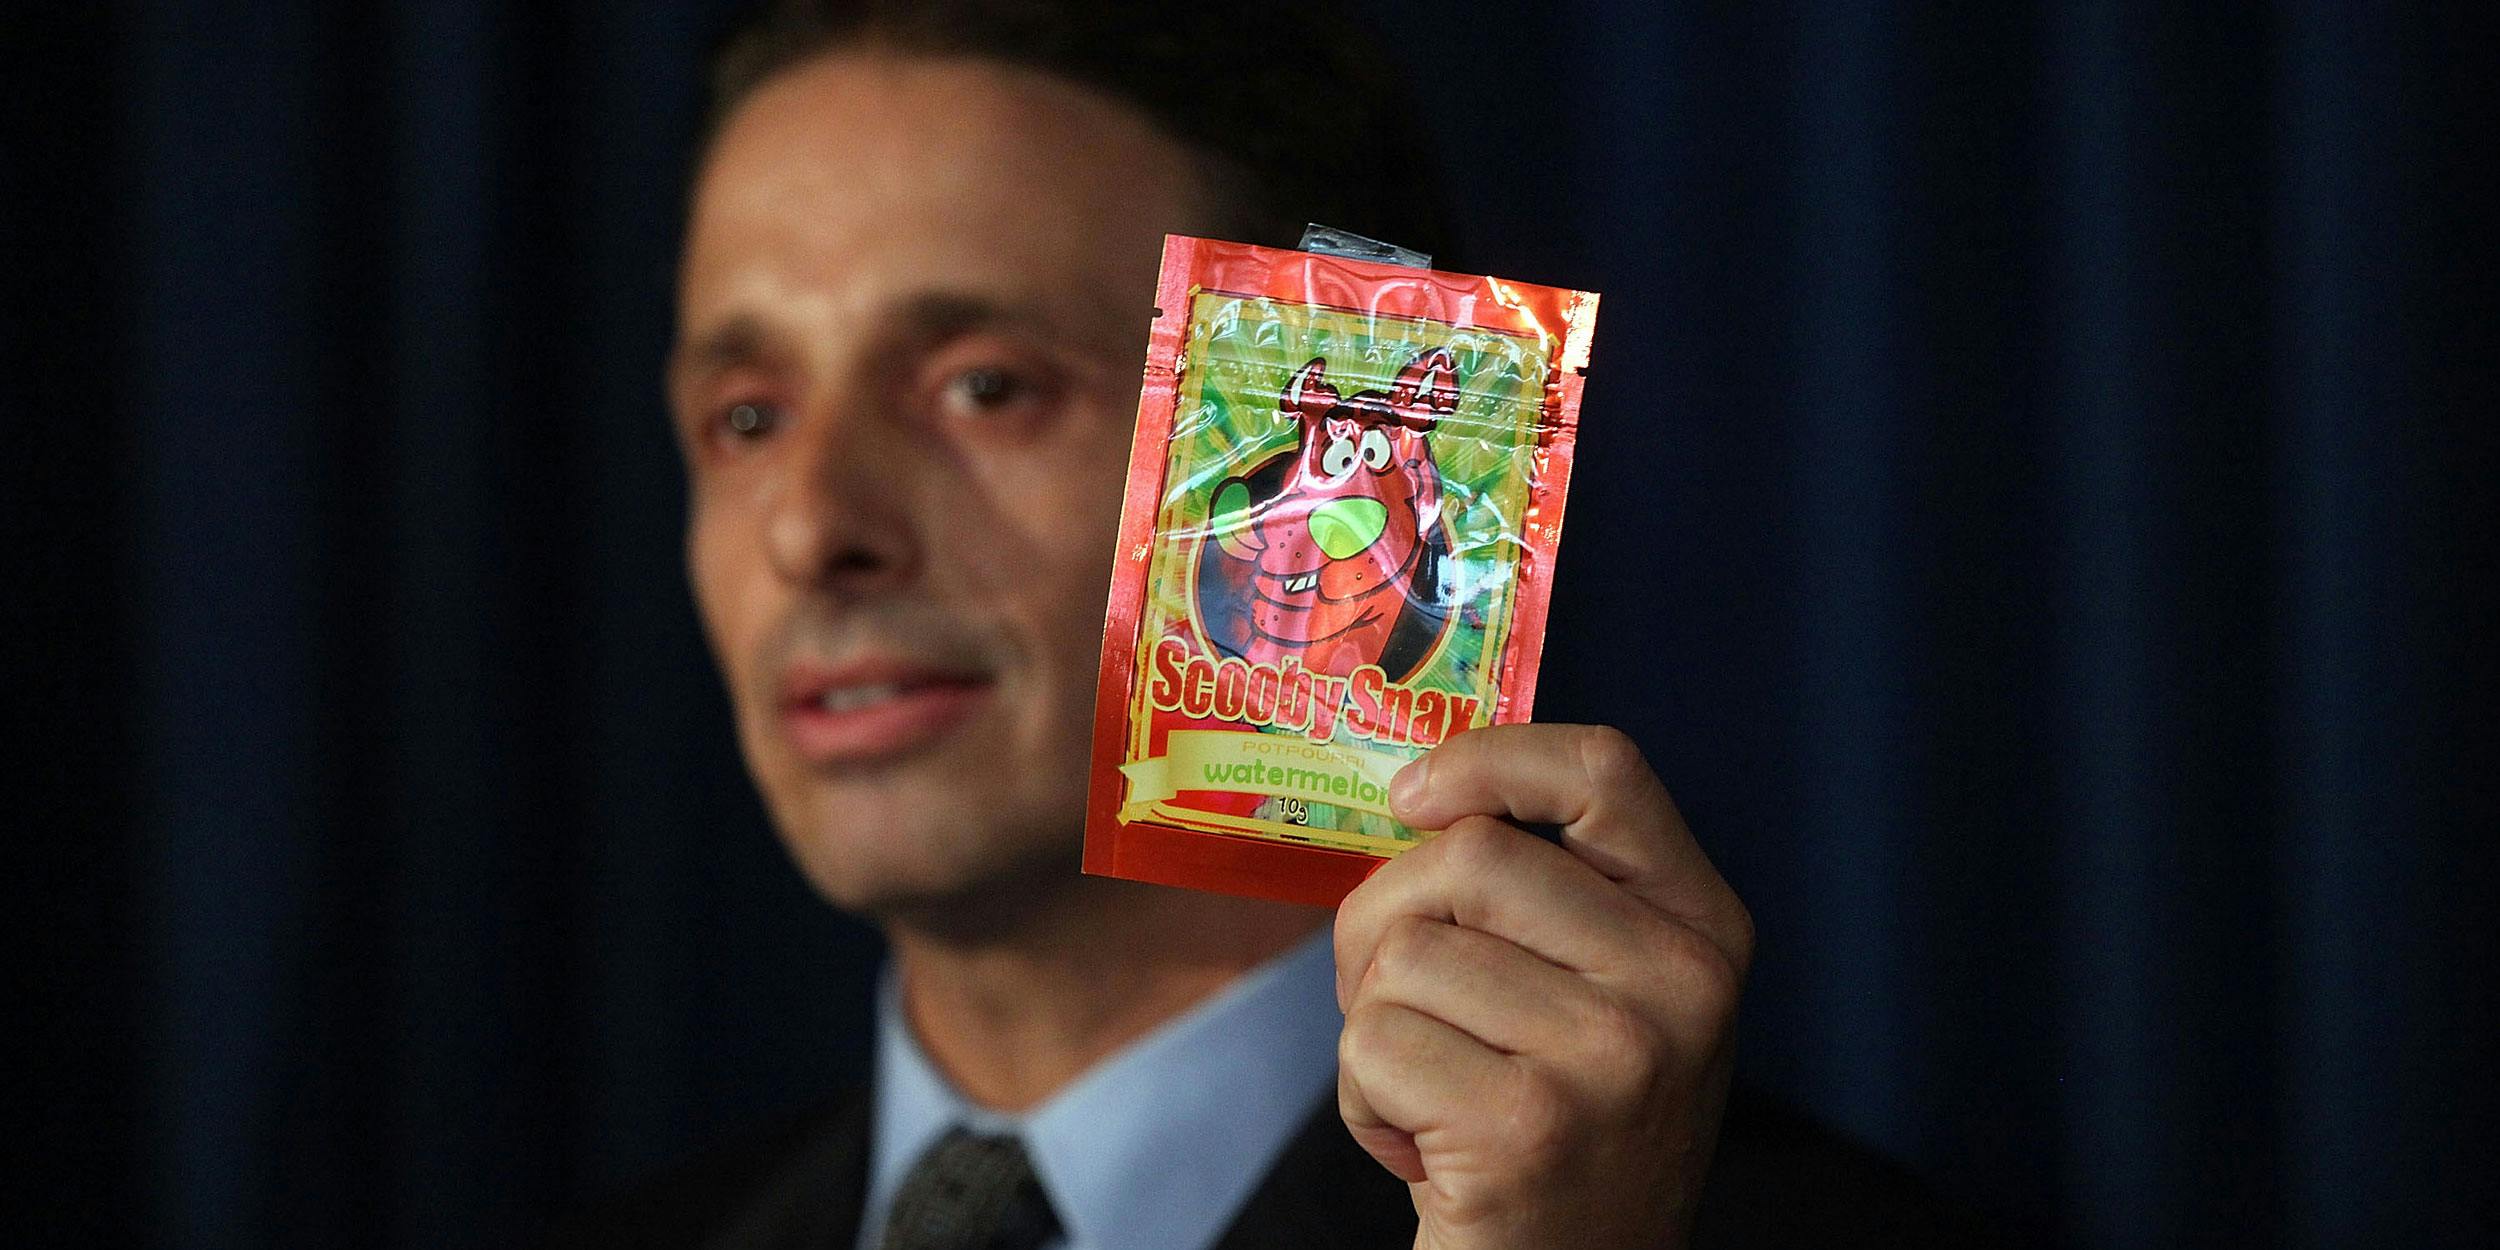 Kieth Kruskall with the Drug Enforcement Administration, holds up a package of synthetic cannabis